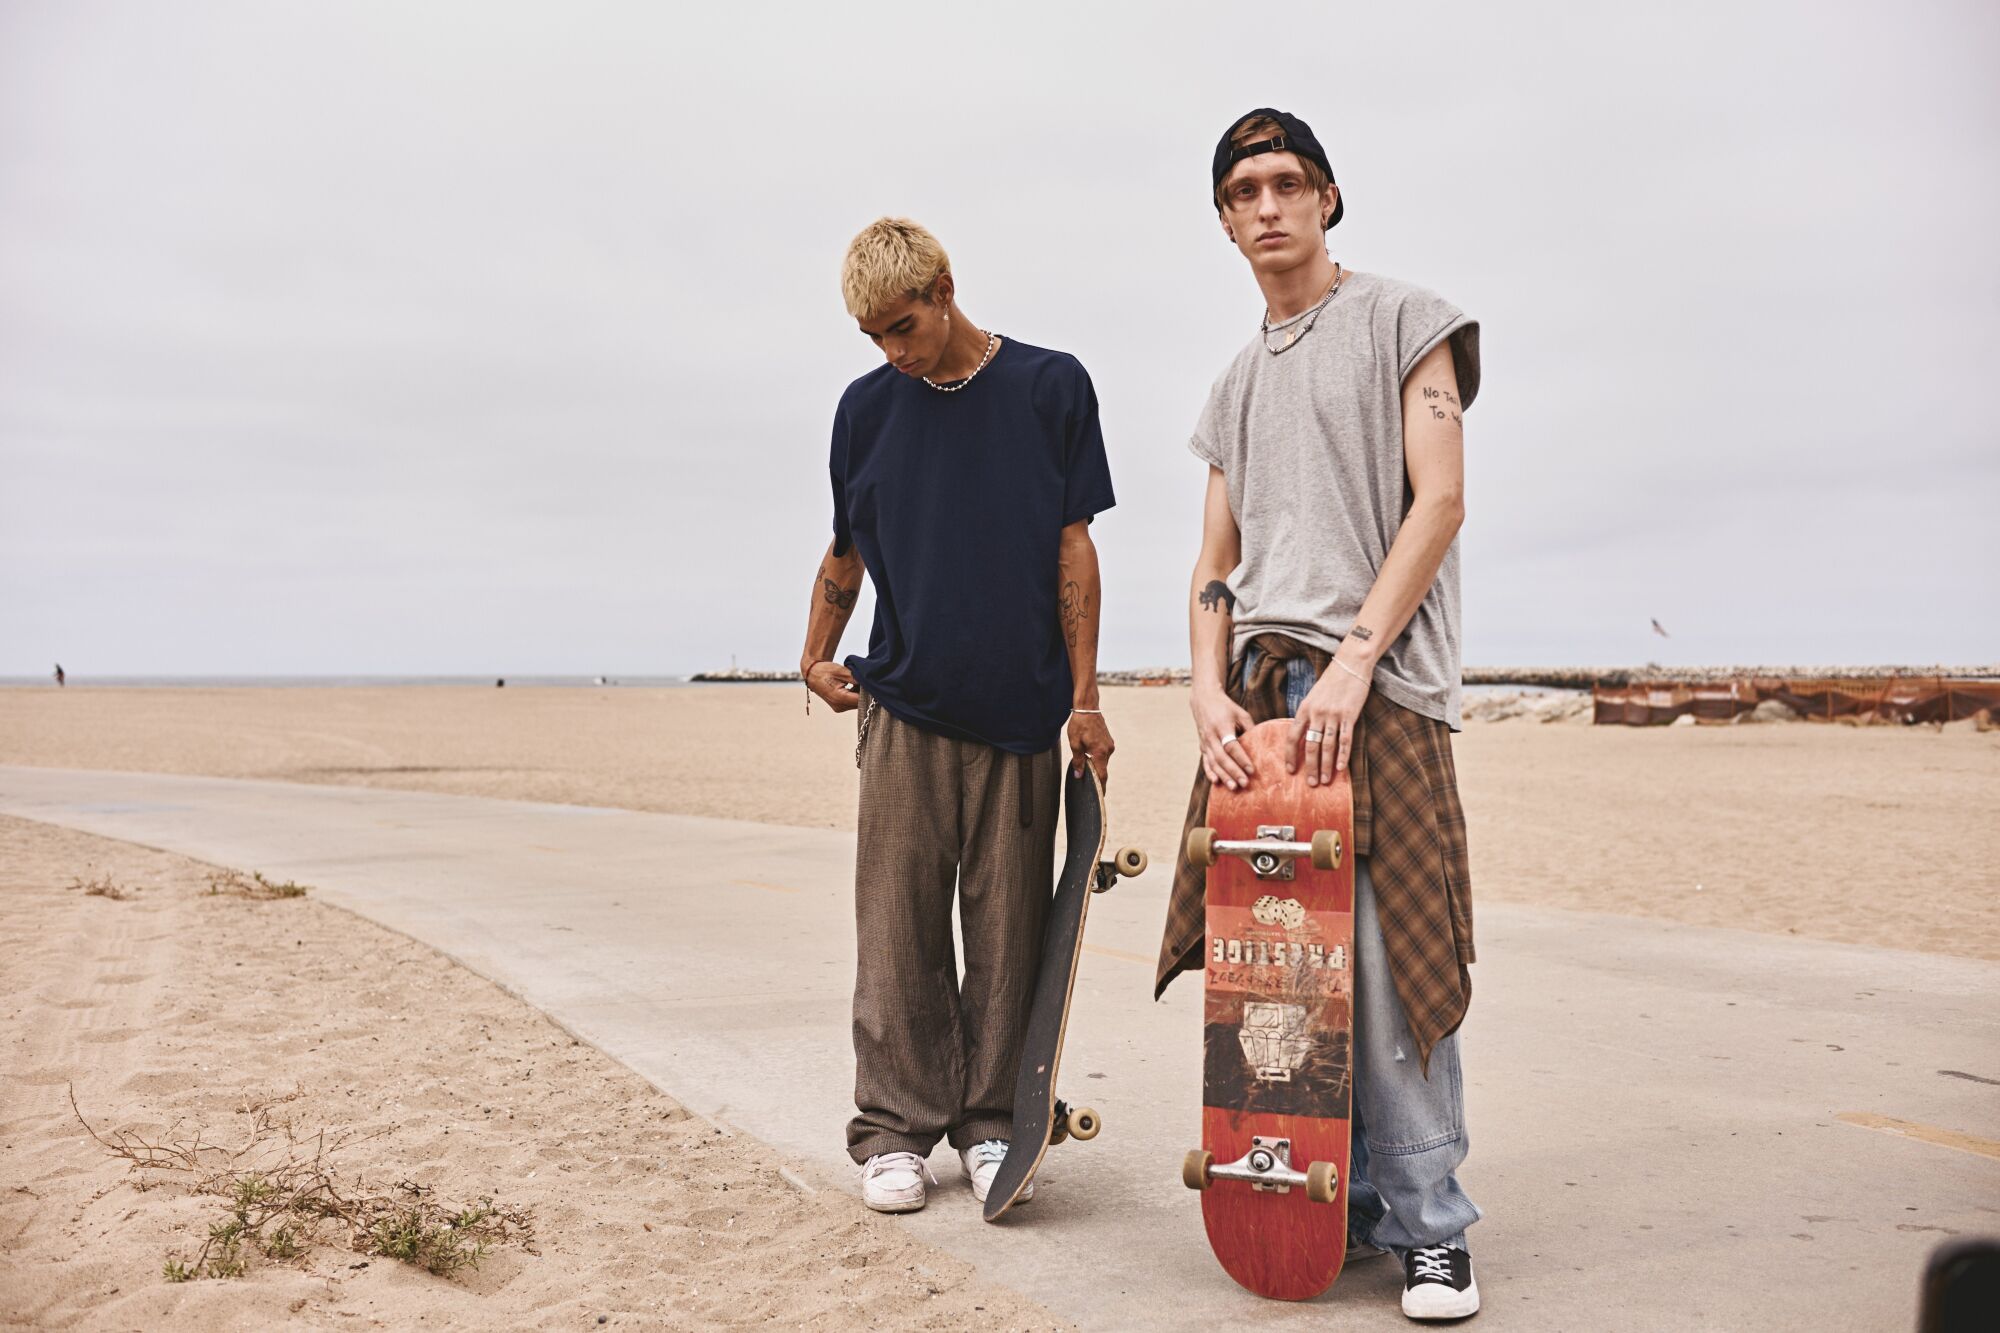 Two skaters from Hiro Clark lookbook.